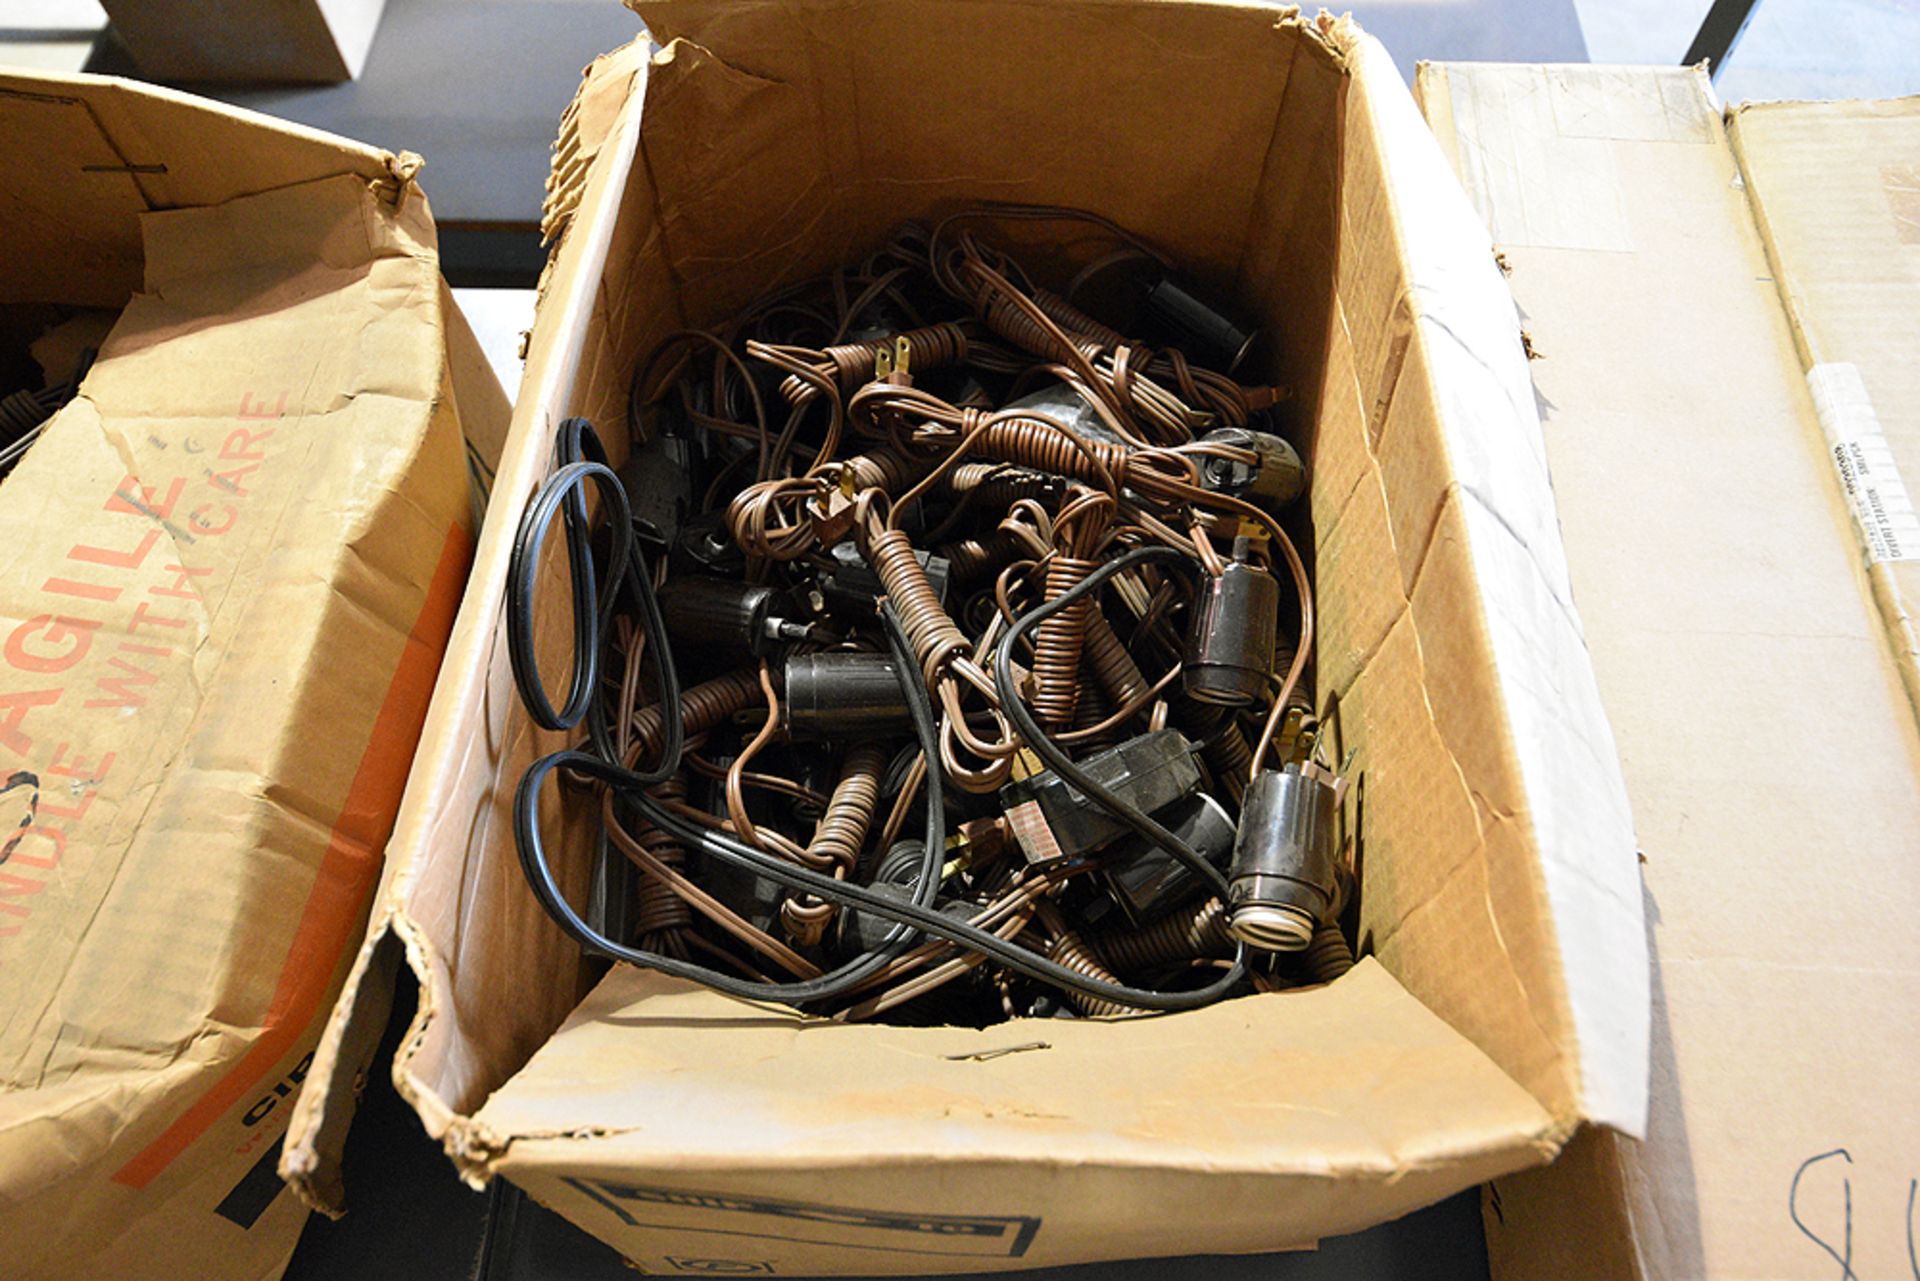 Contents of 6 tables consisting of: welding accessories, Dayton heater, Wire etc. - Image 2 of 8